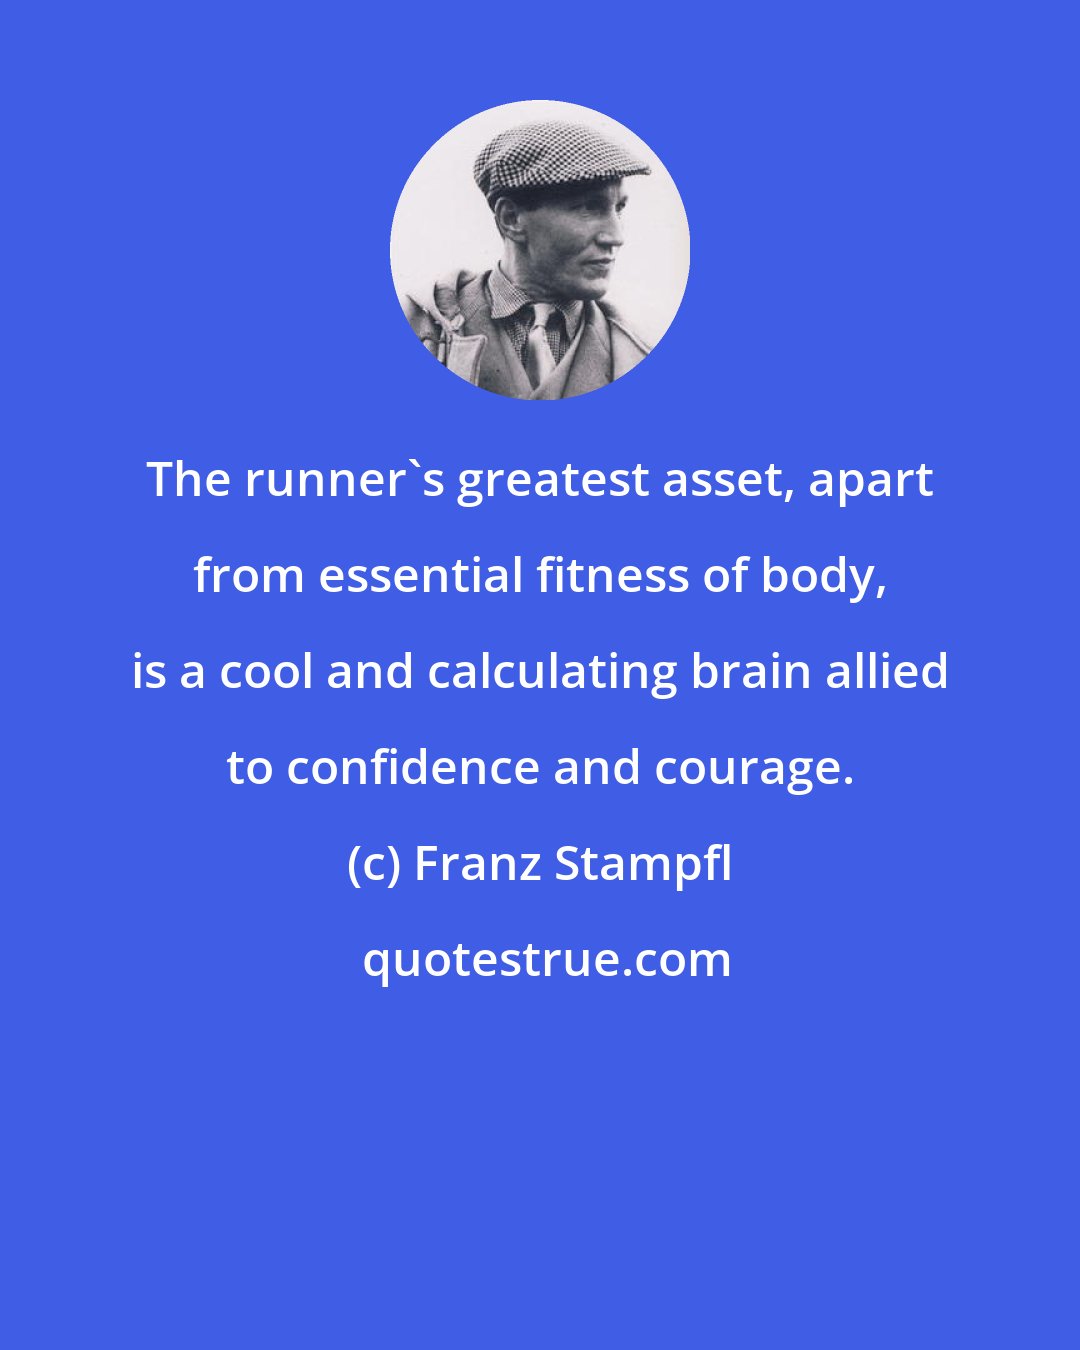 Franz Stampfl: The runner's greatest asset, apart from essential fitness of body, is a cool and calculating brain allied to confidence and courage.